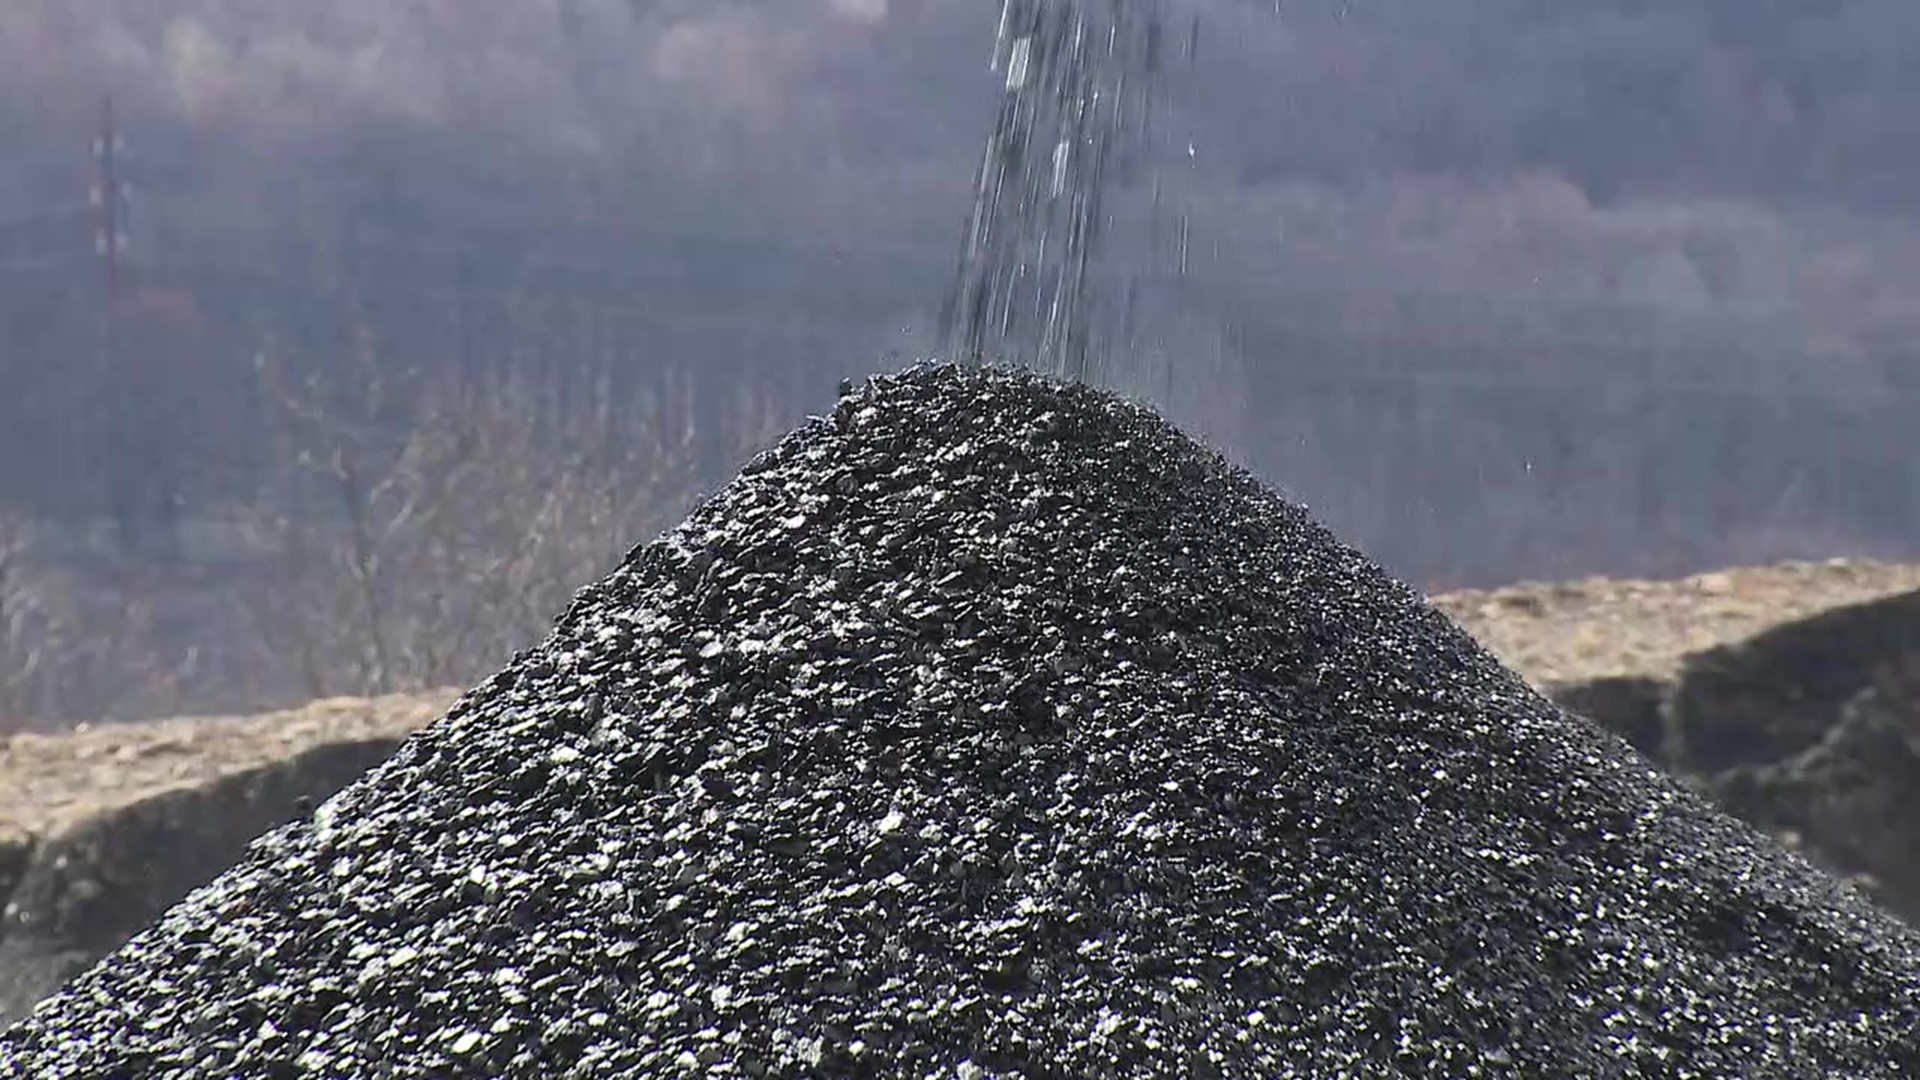 Coal prices reached a record high last month, as prices have increased significantly from last year.